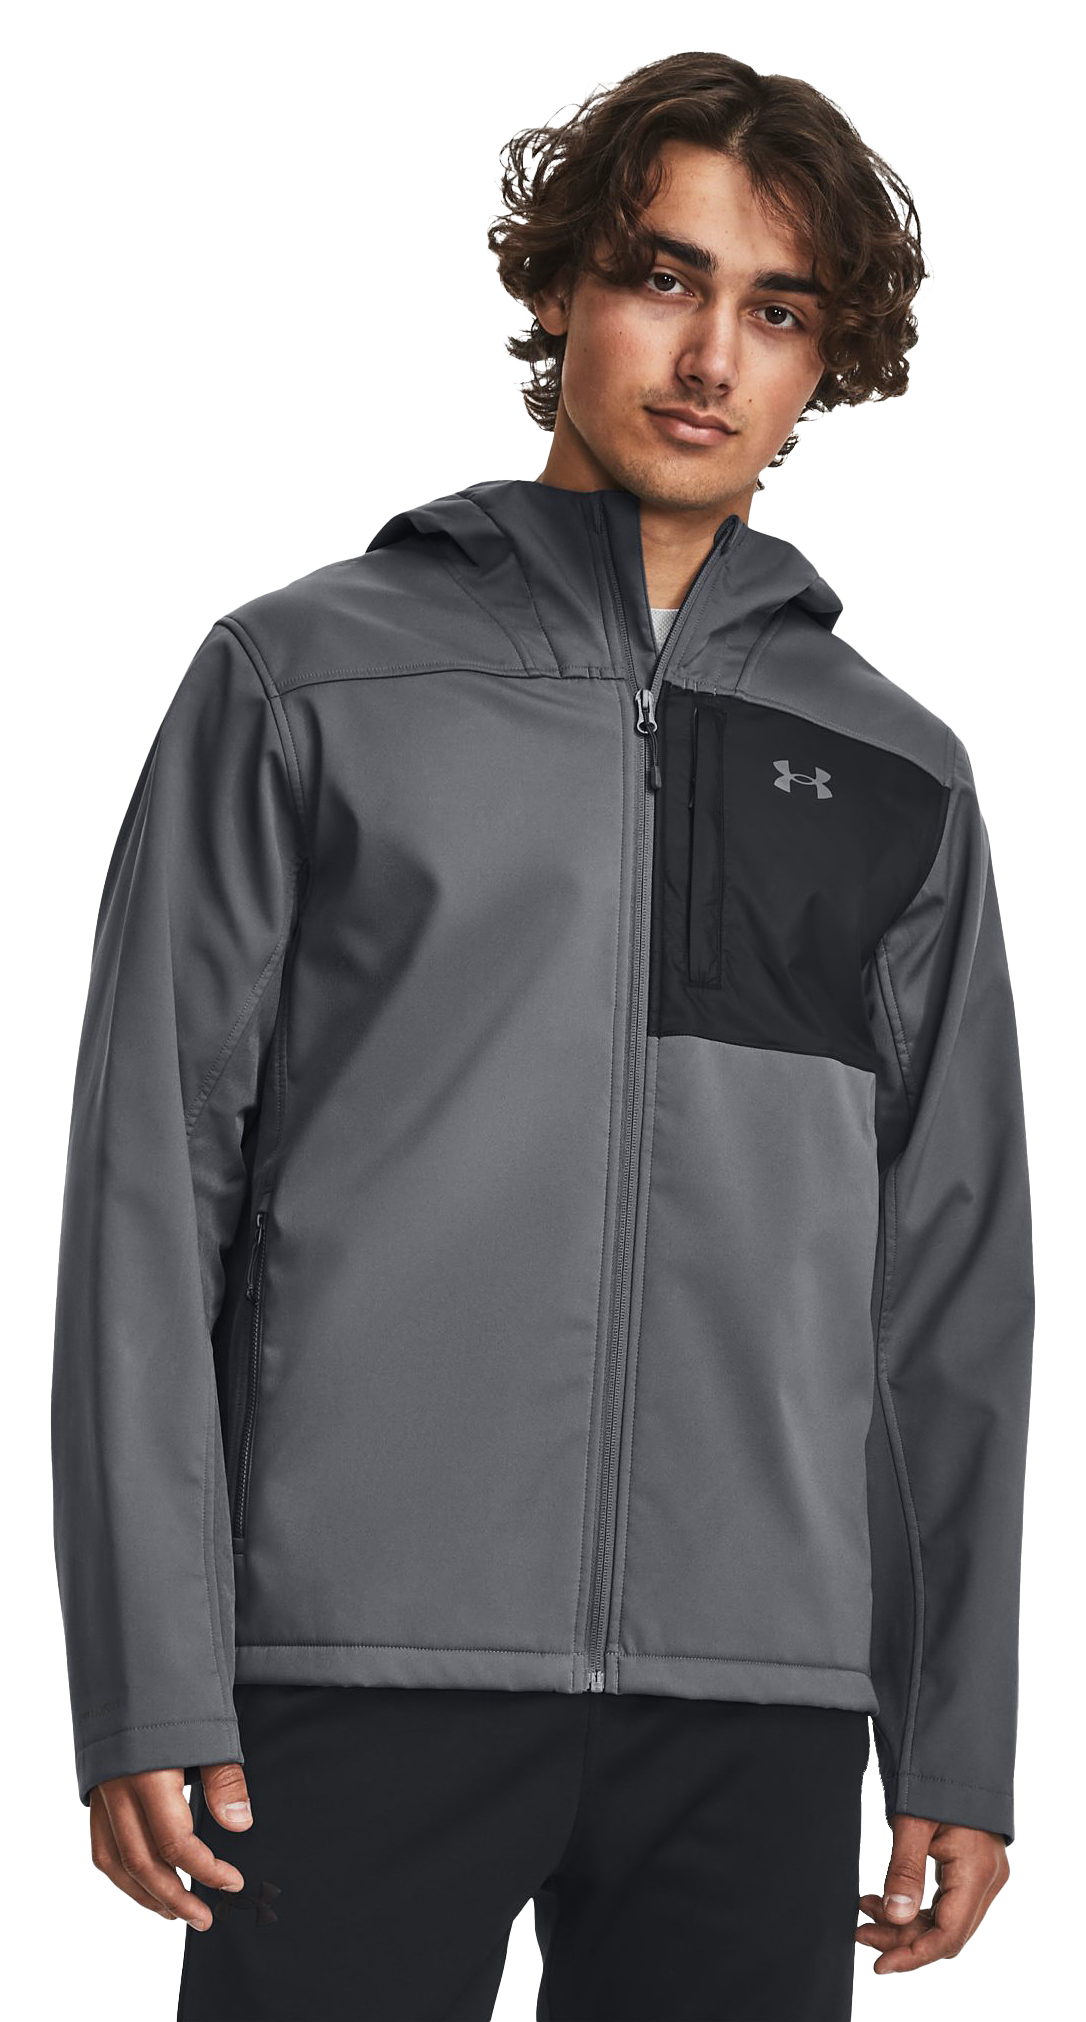 Under Armour Storm ColdGear Infrared Shield 2.0 Hooded Jacket for Men - Pitch Gray/Black - M